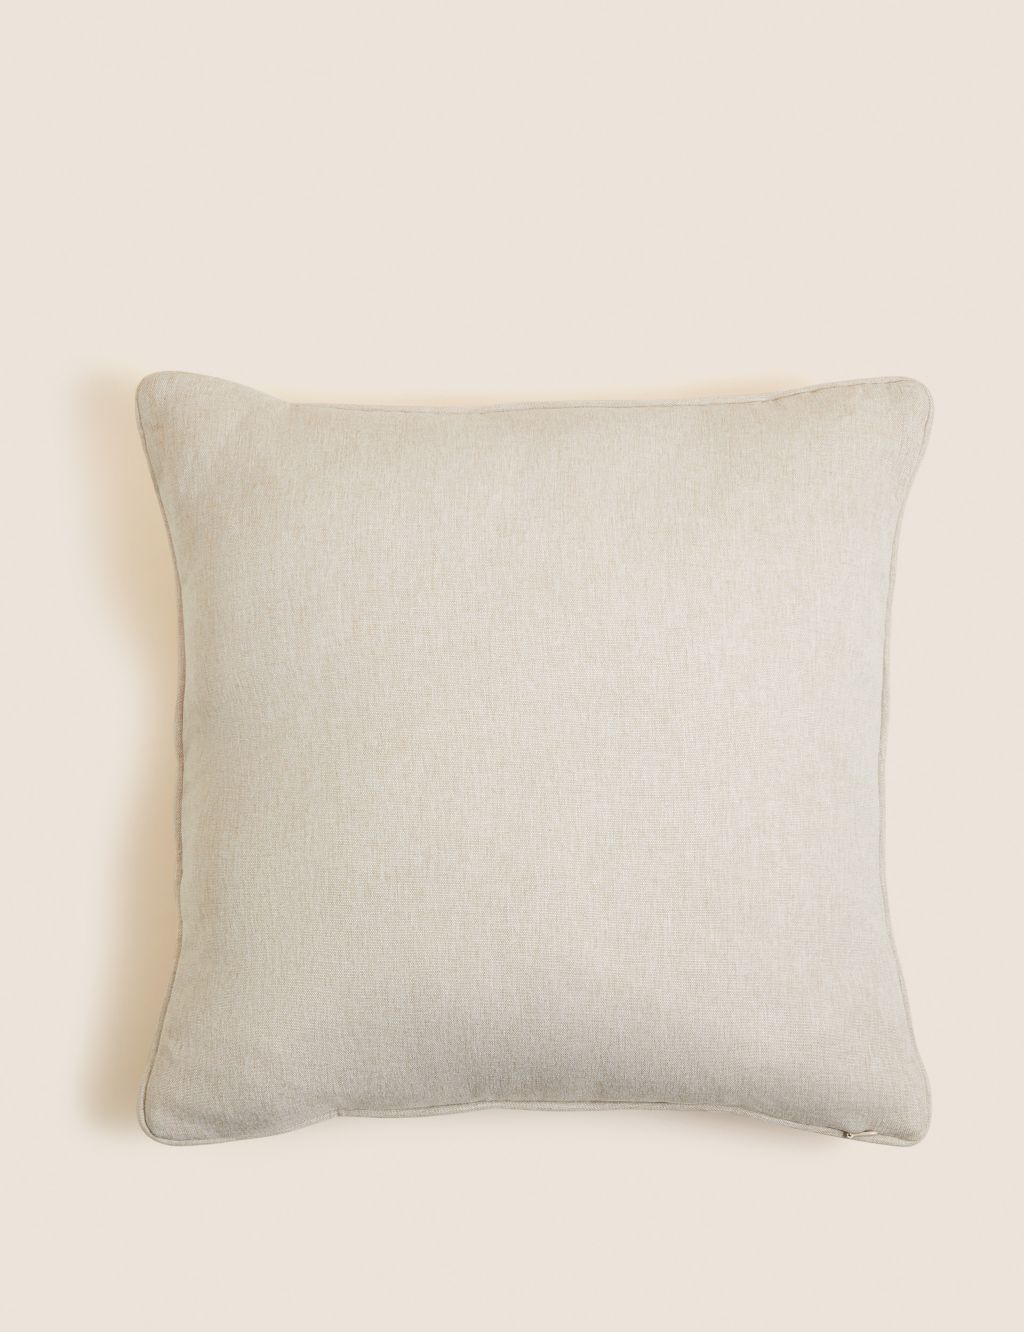 Piped Cushion image 1